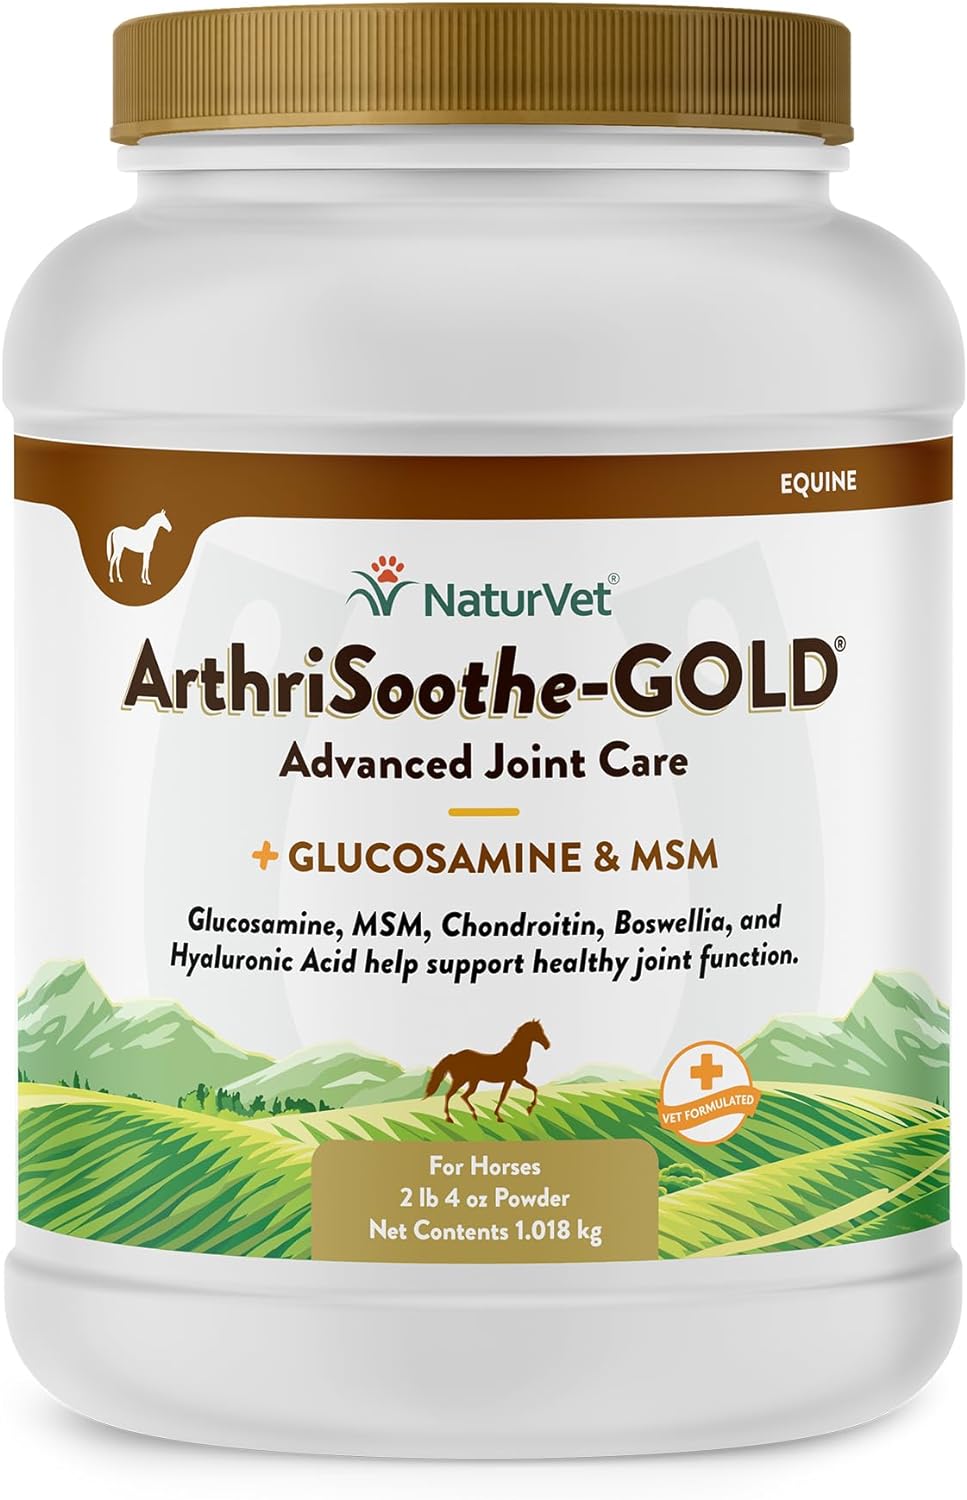 NaturVet ArthriSoothe Gold Advanced Joint Horse Supplement Powder – For Healthy Joint Function in 